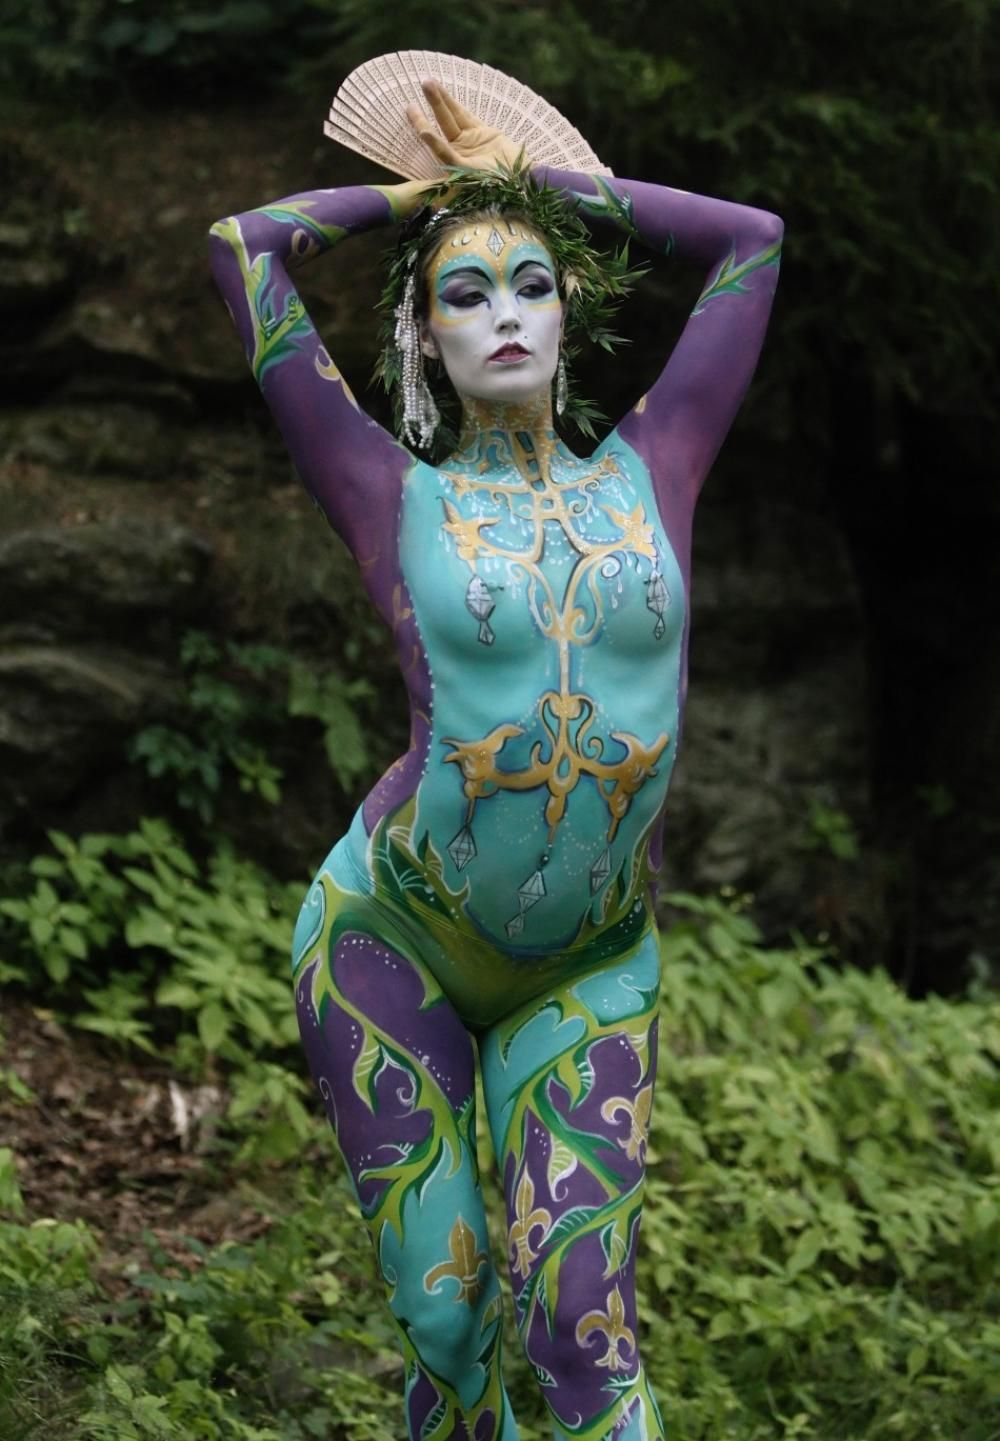 124388-a-model-poses-during-the-annual-world-bodypainting-festival-in-poertsc